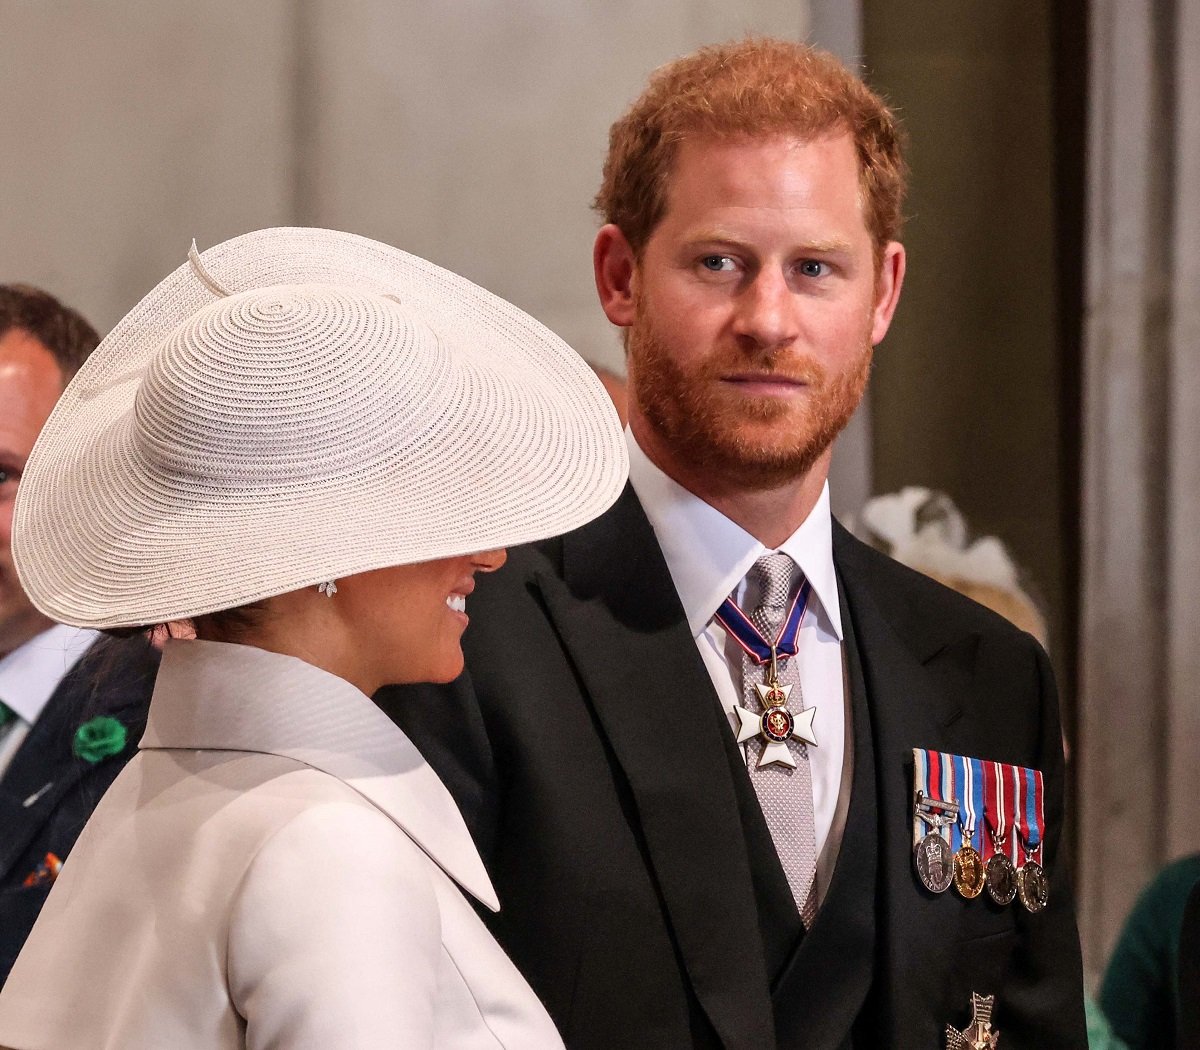 Prince Harry, who a royal author claims is experiencing "self-inflicted" pain, leaving St Paul's cathedral with Meghan Markle after service